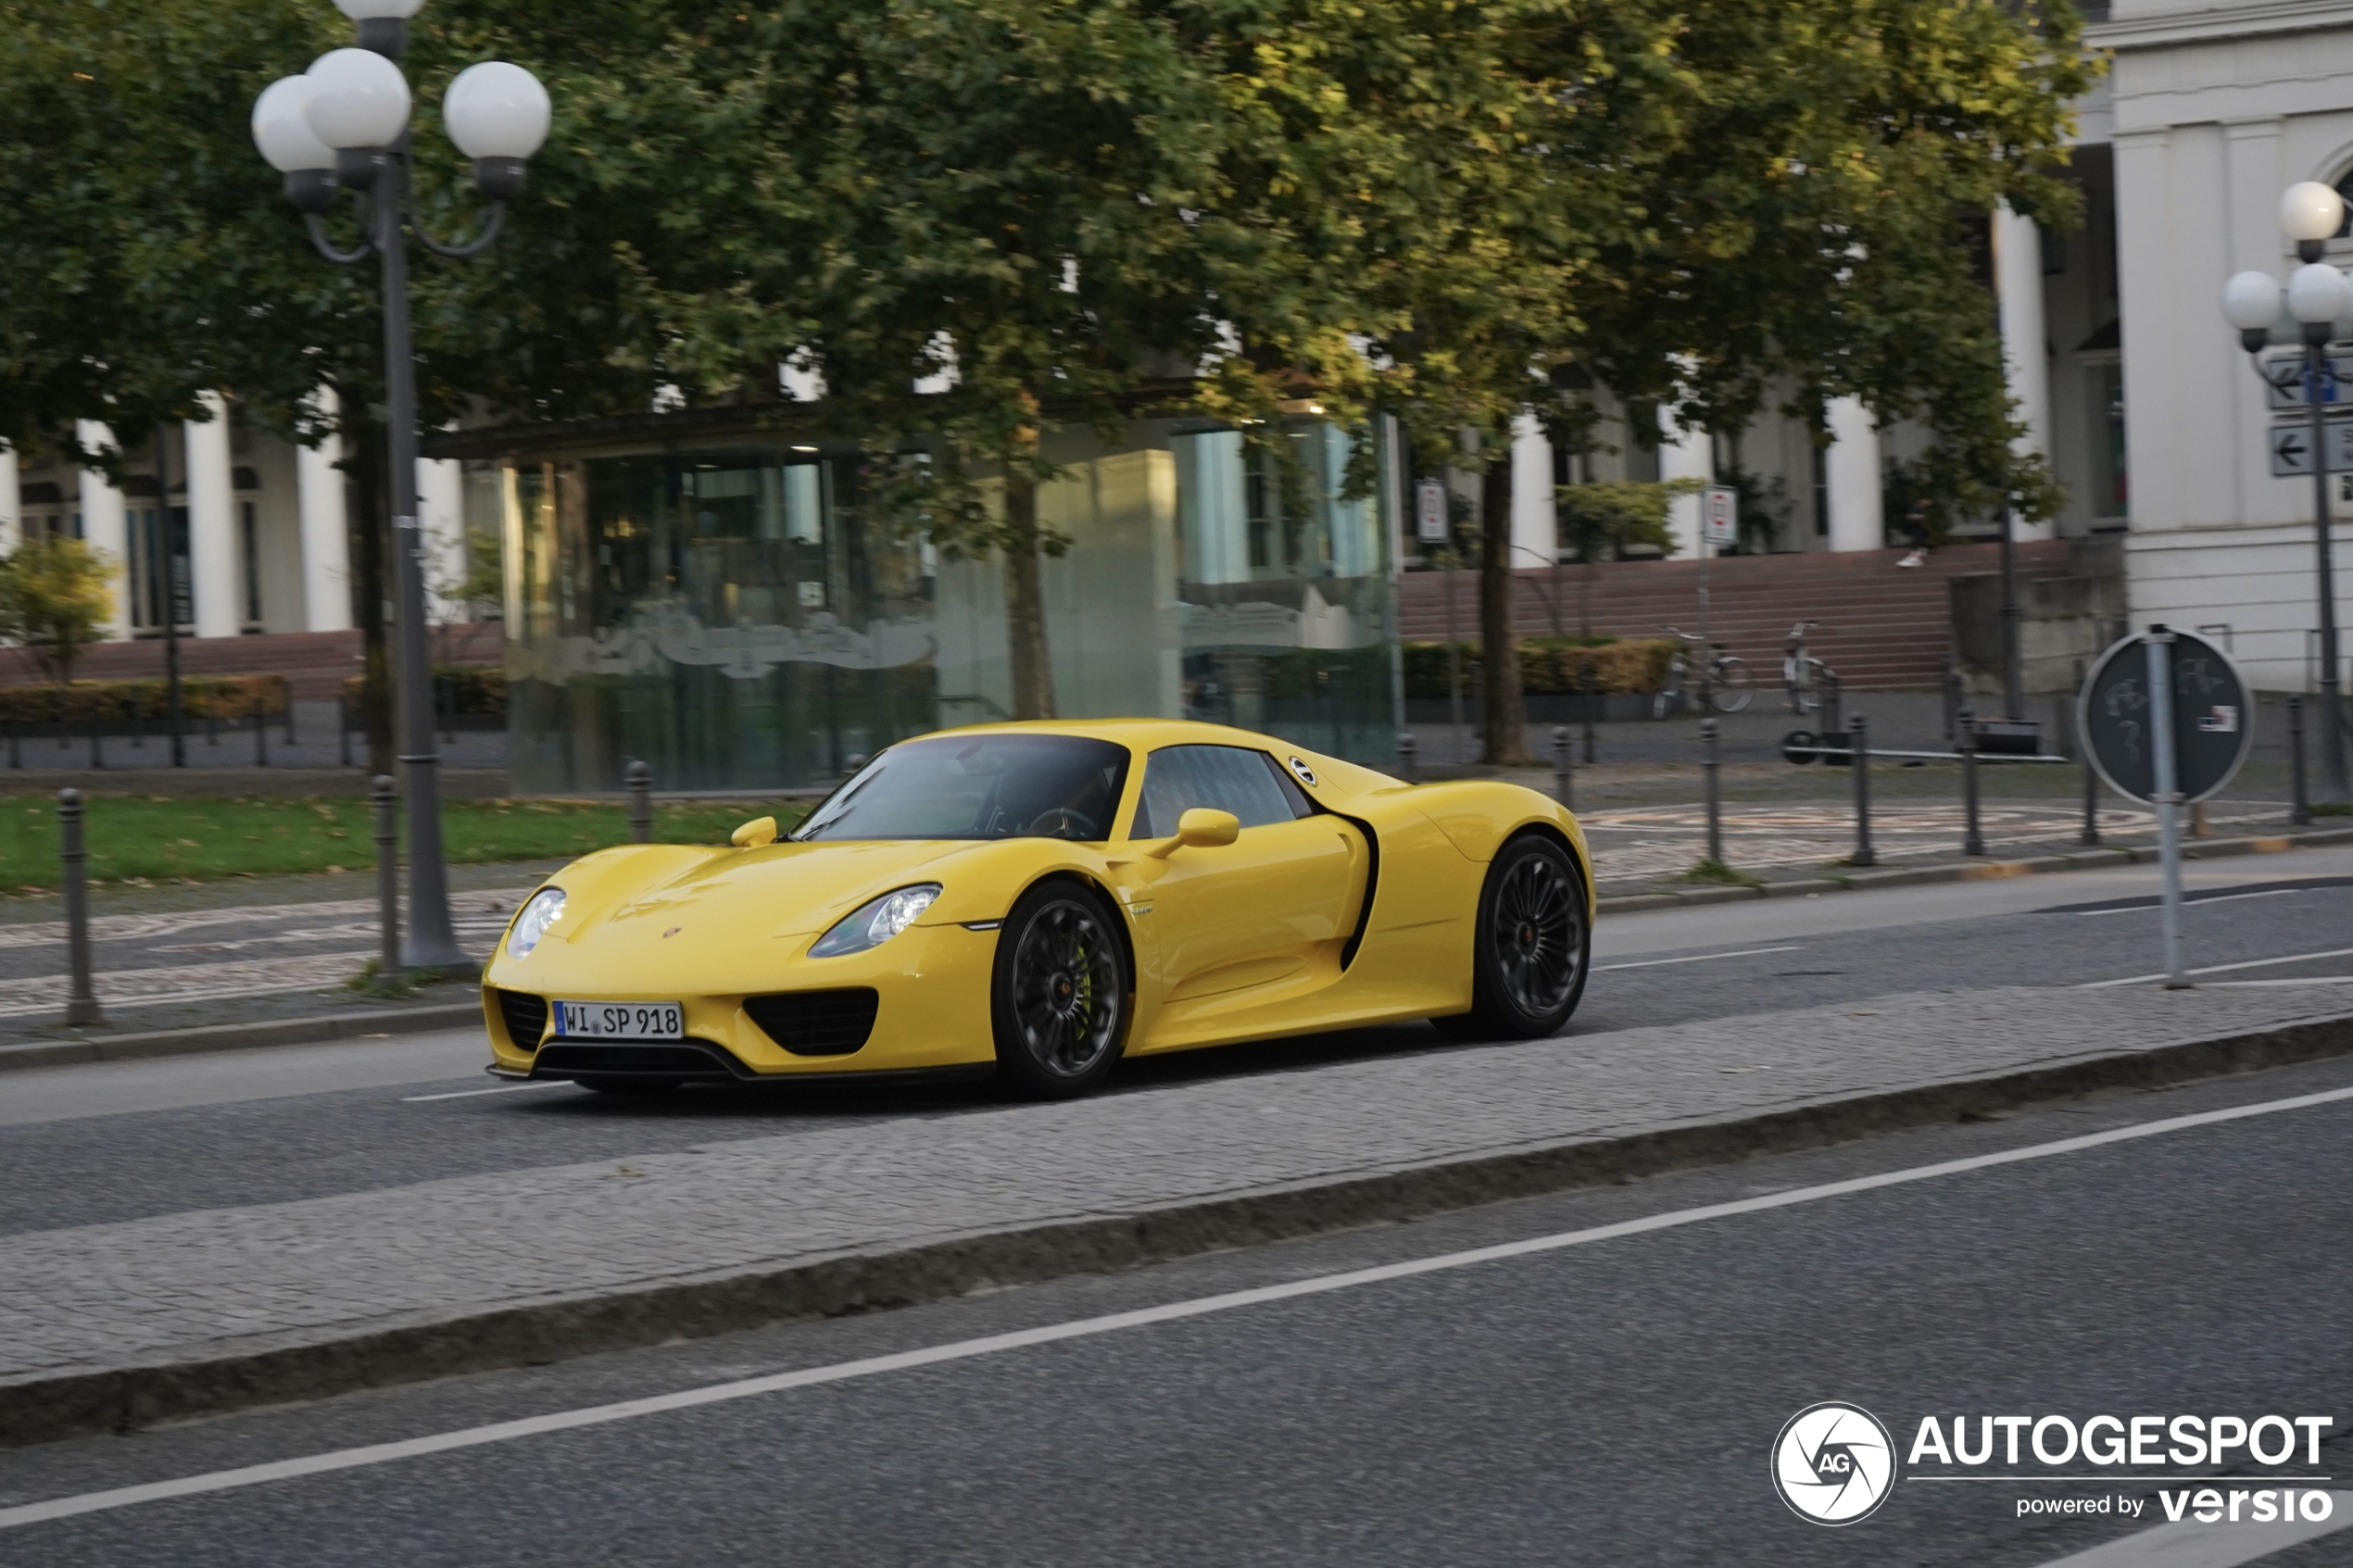 A yellow 918 is finally returning to Wiesbaden